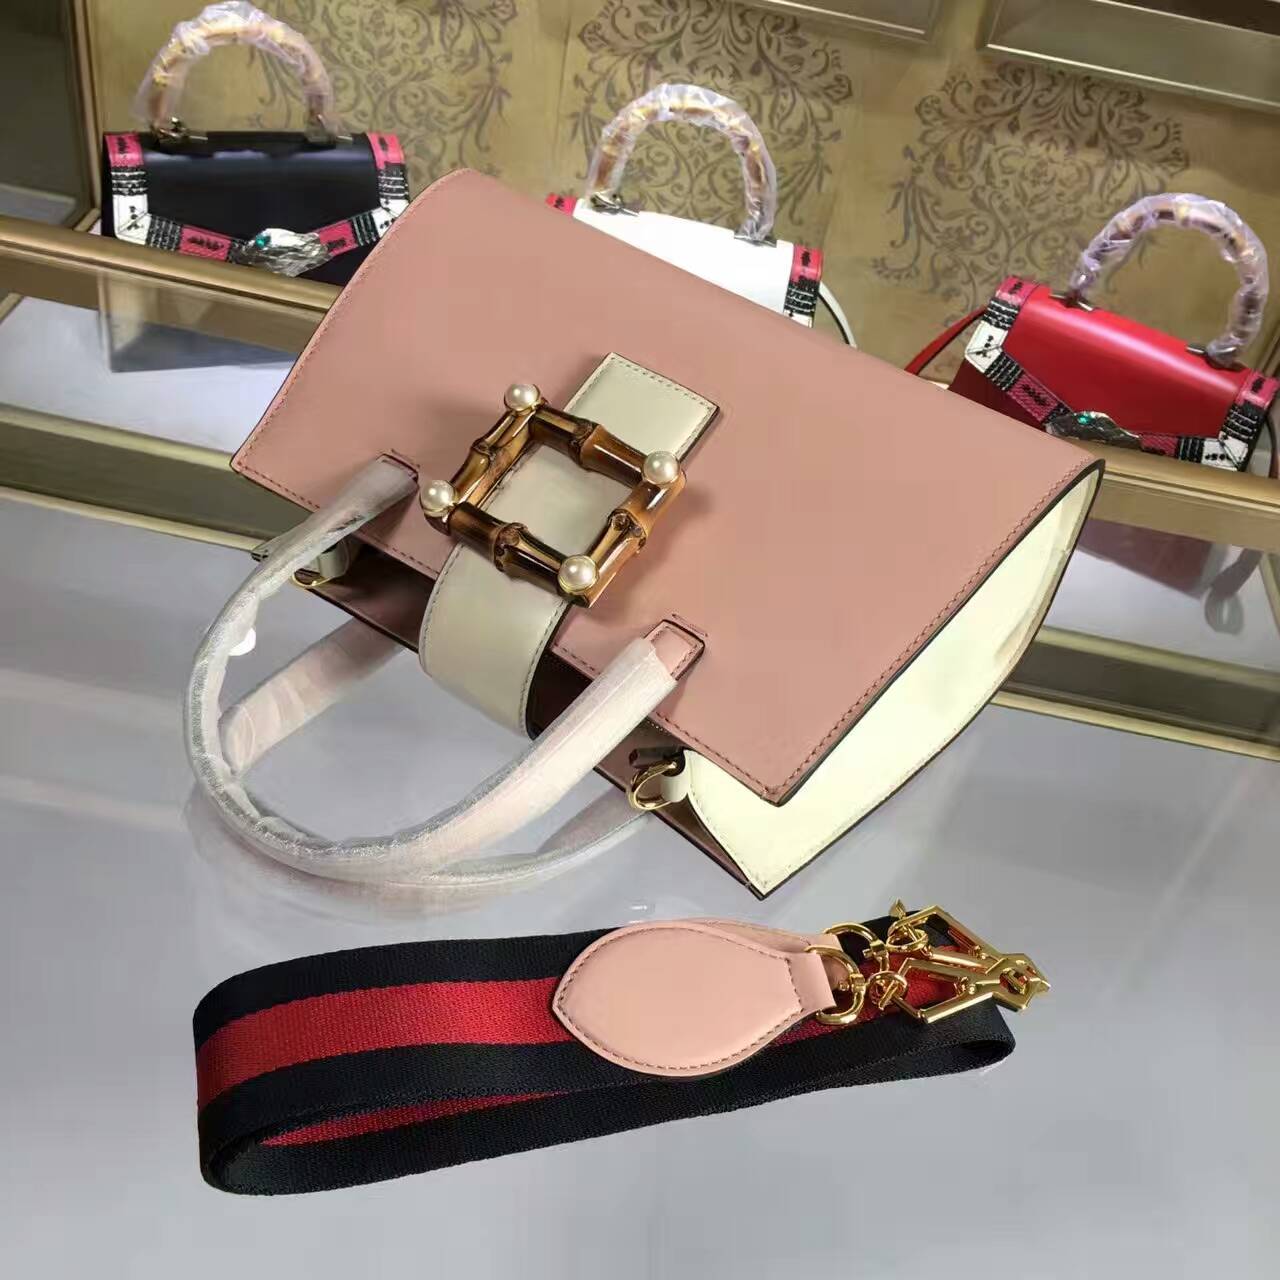 Gucci Nymphea leather top handle bag-453756